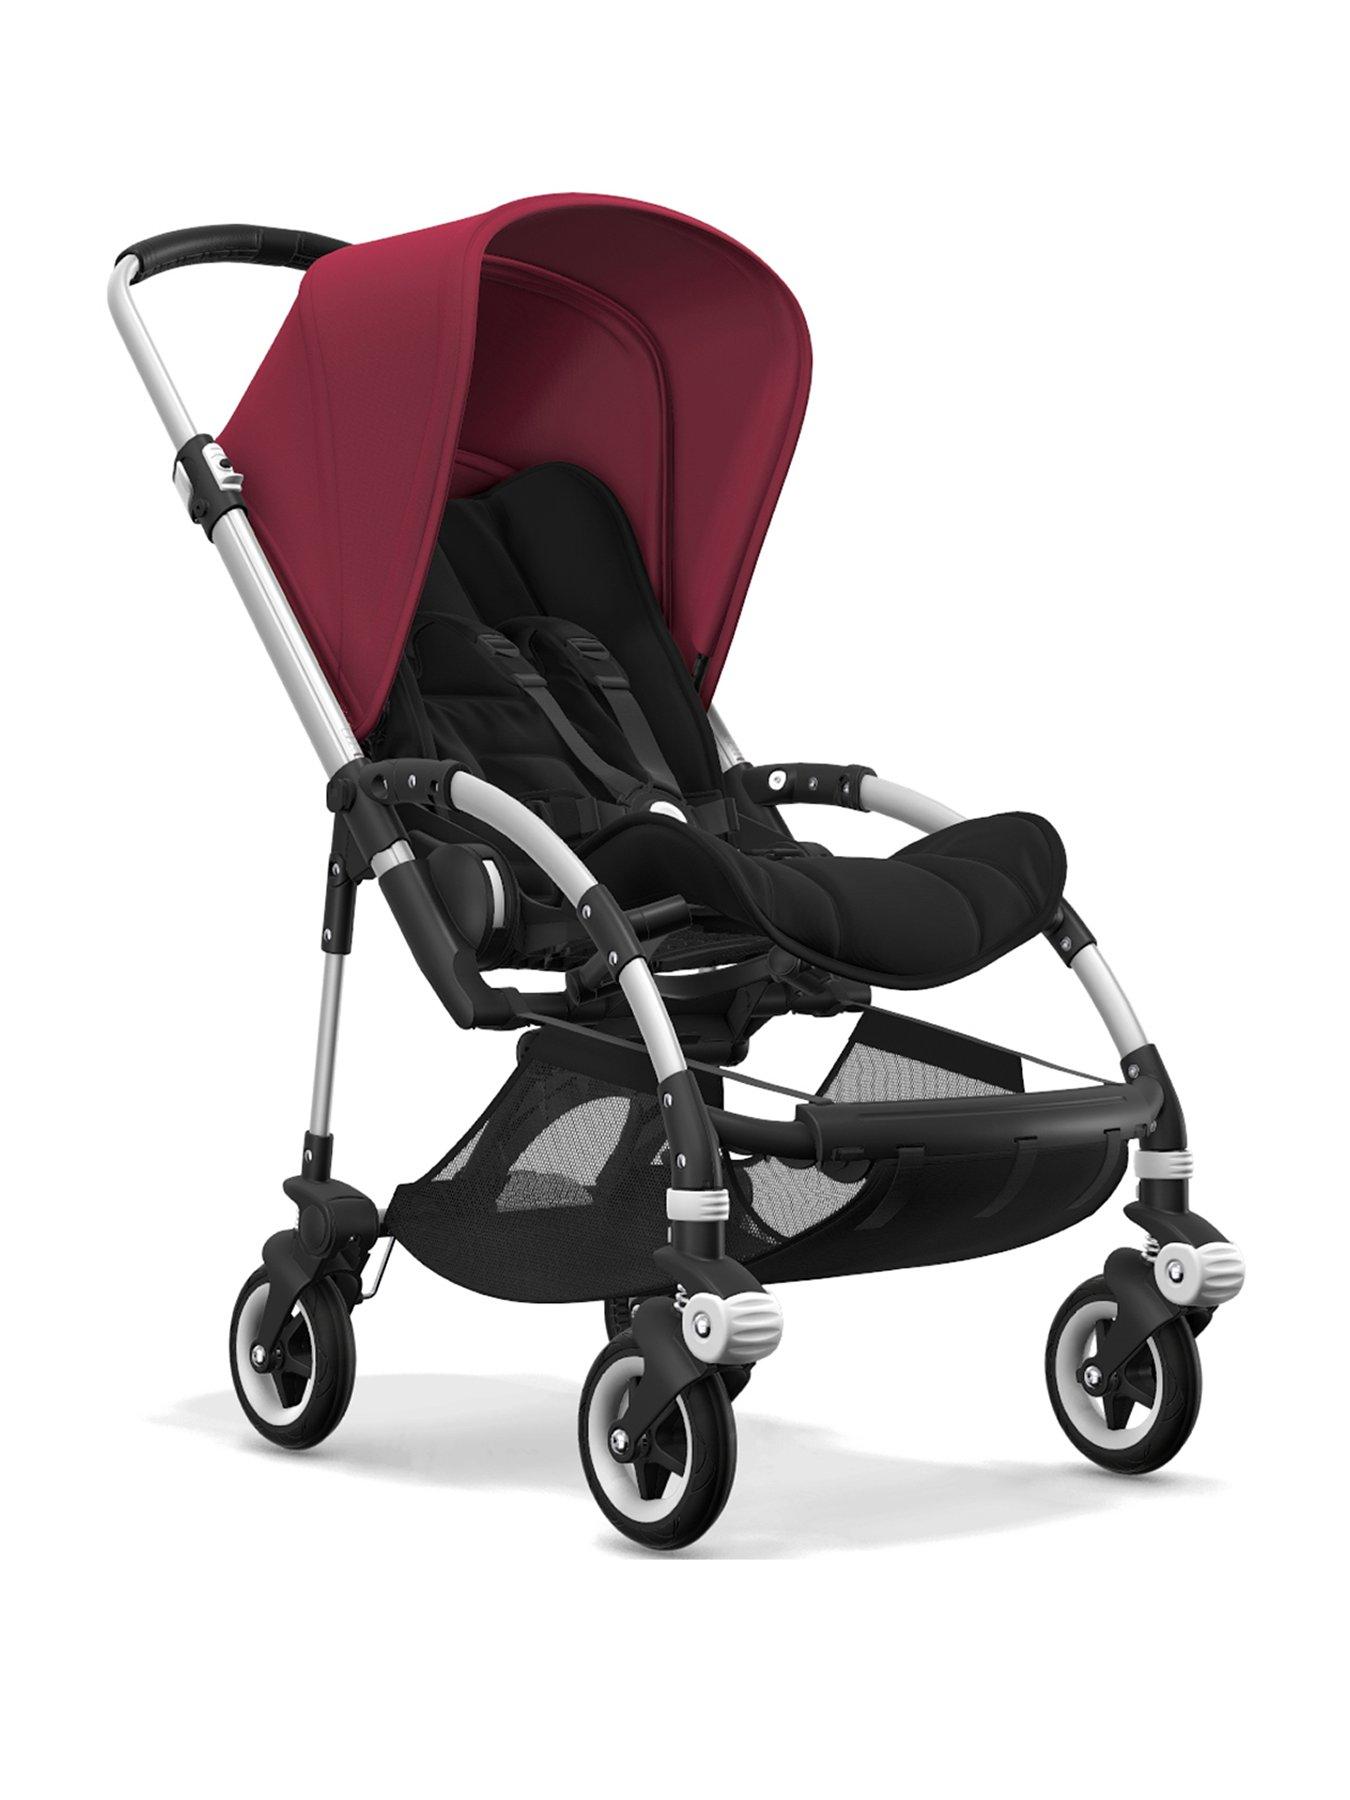 travel system with adjustable handle height